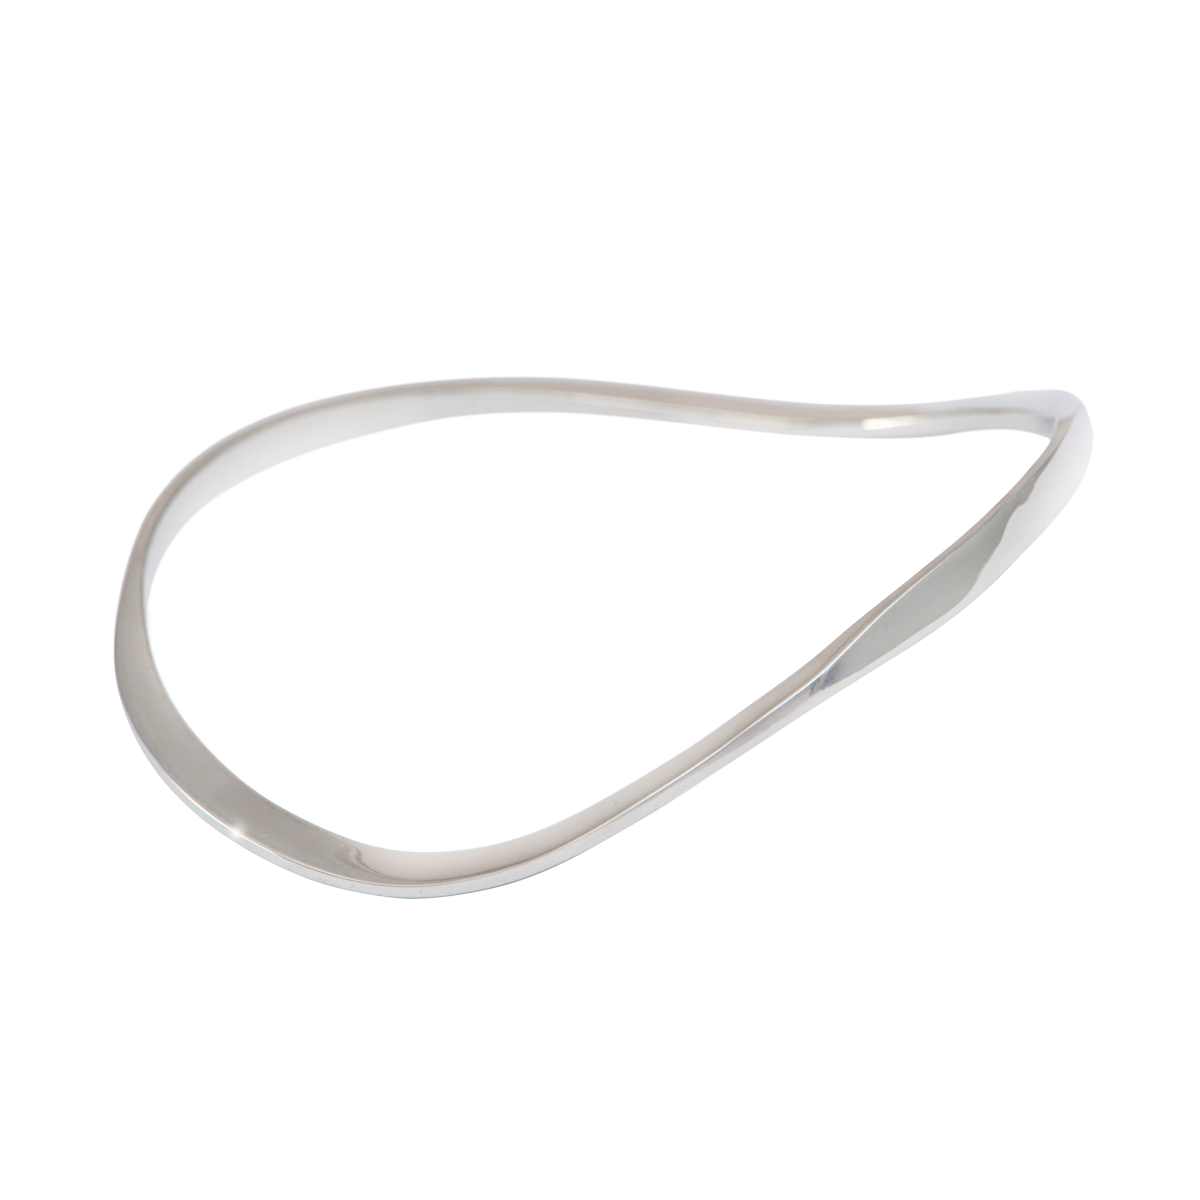 Sterling Silver Wavy Bangle with a Slightly Triangular Shape